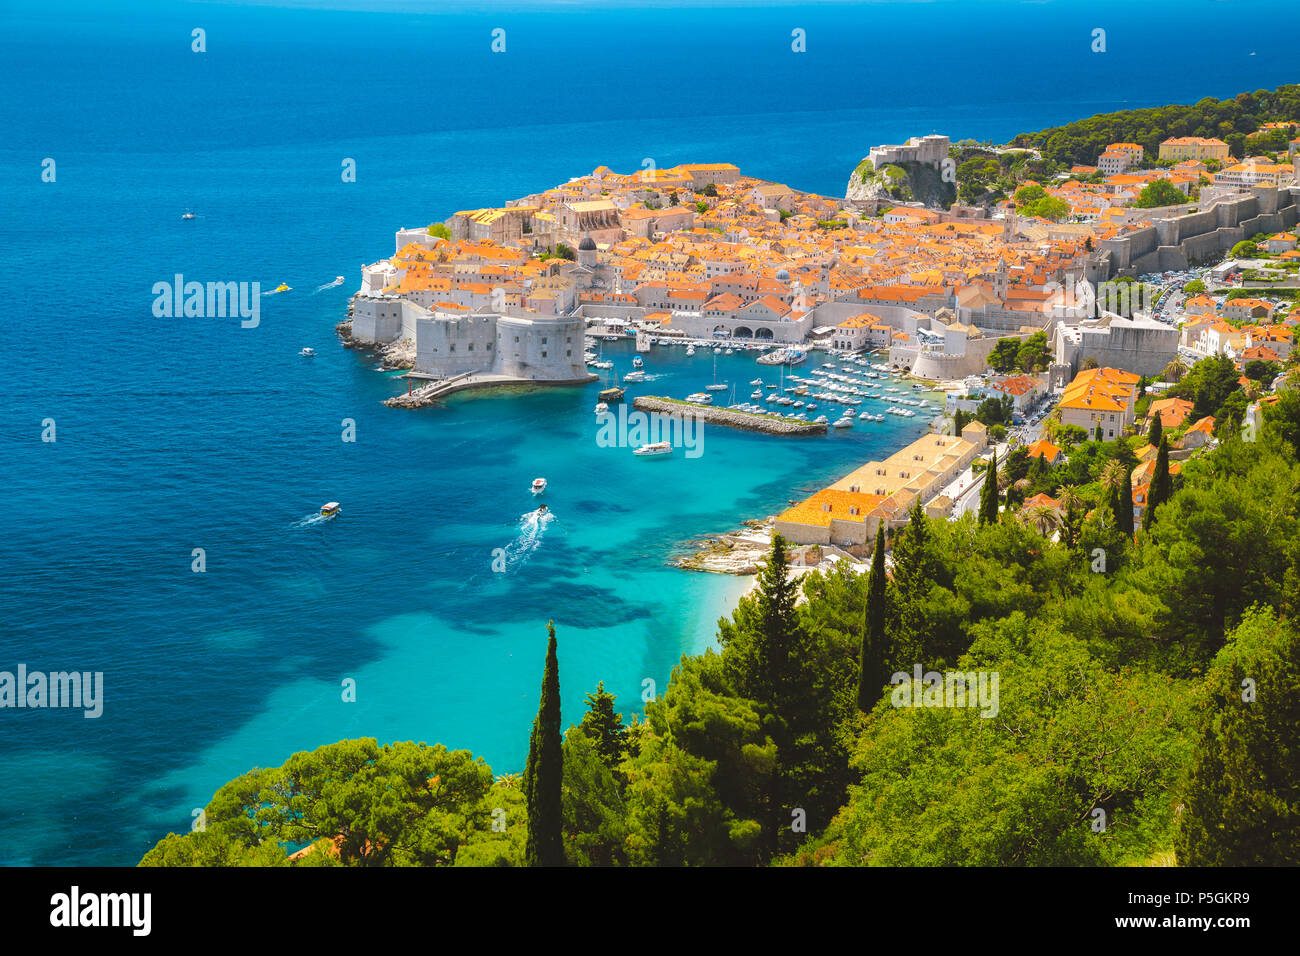 Panoramic aerial view of the historic town of Dubrovnik, one of the most famous tourist destinations in the Mediterranean Sea, from Srd mountain Stock Photo